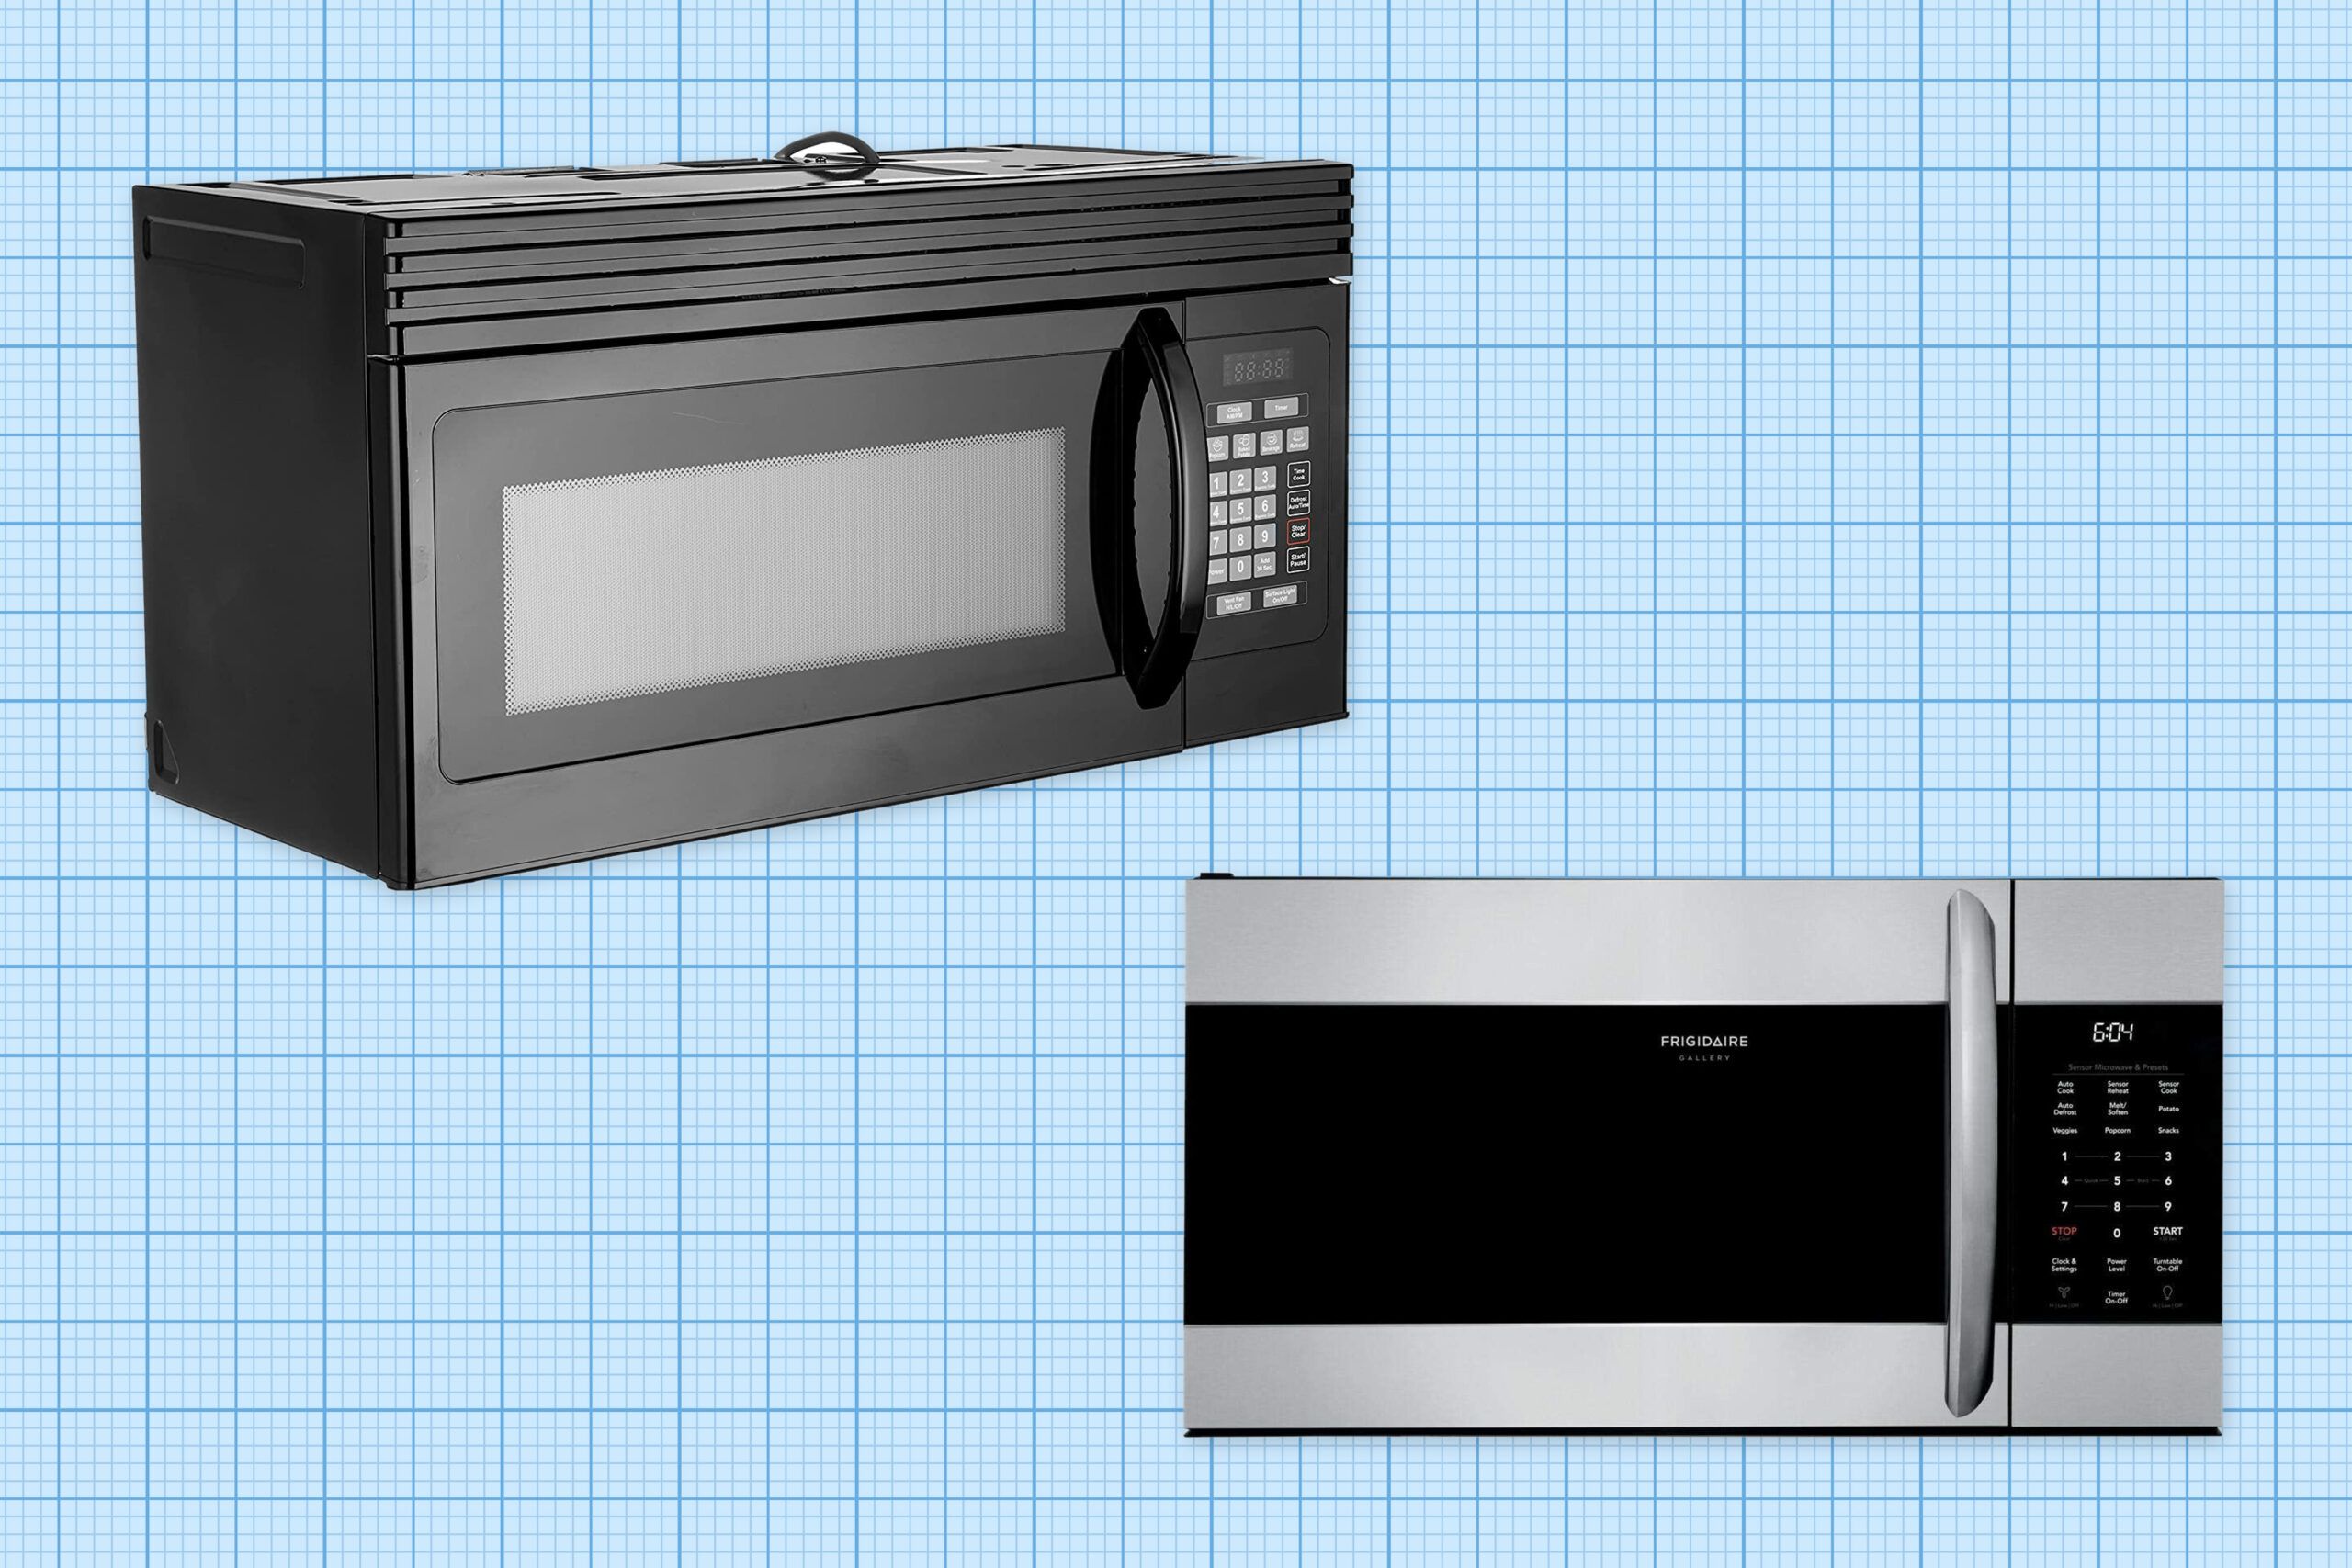 BLACK + DECKER Over-the-Range Microwave and FRIGIDAIRE SmudgeProof Over-the-Range Microwave isolated on a blue grid paper background. Lead image for the Best Over-the-Range Microwaves Guide.